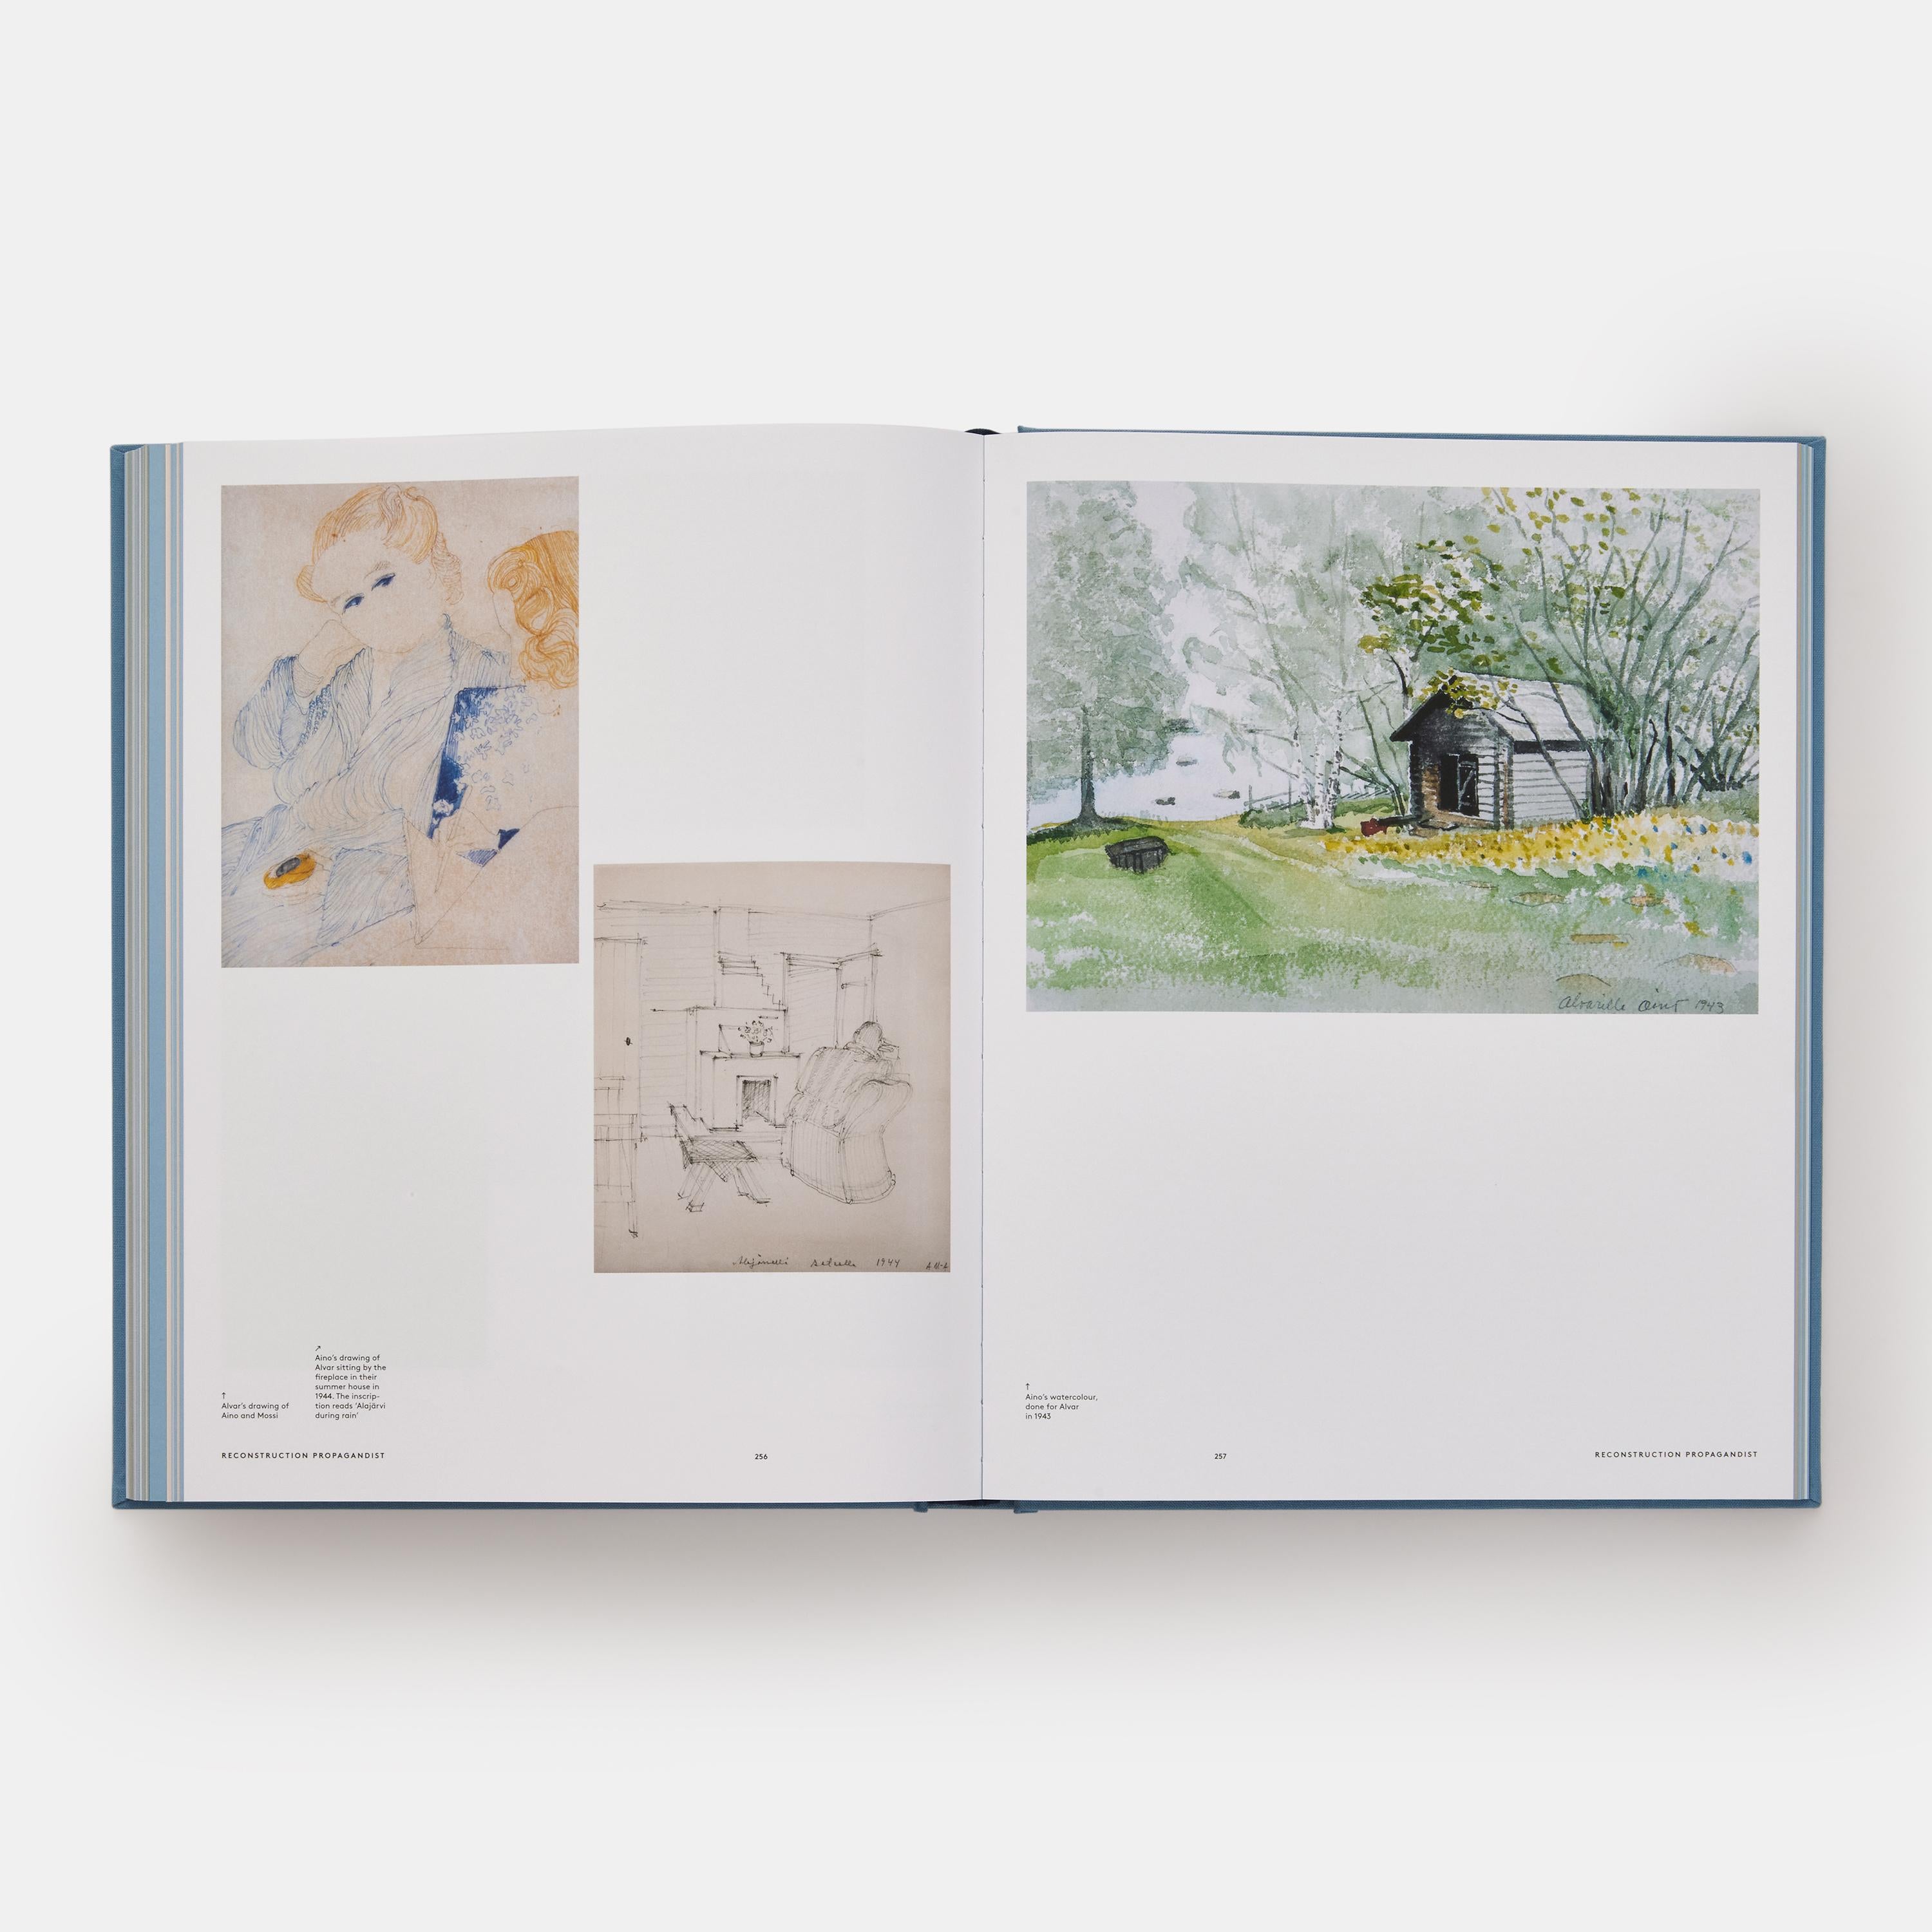 A visual biography of Aino and Alvar Aalto, who designed some of the most iconic objects of the twentieth century

Aino and Alvar Aalto together founded Artek and created some of the most celebrated objects and buildings of the twentieth century.